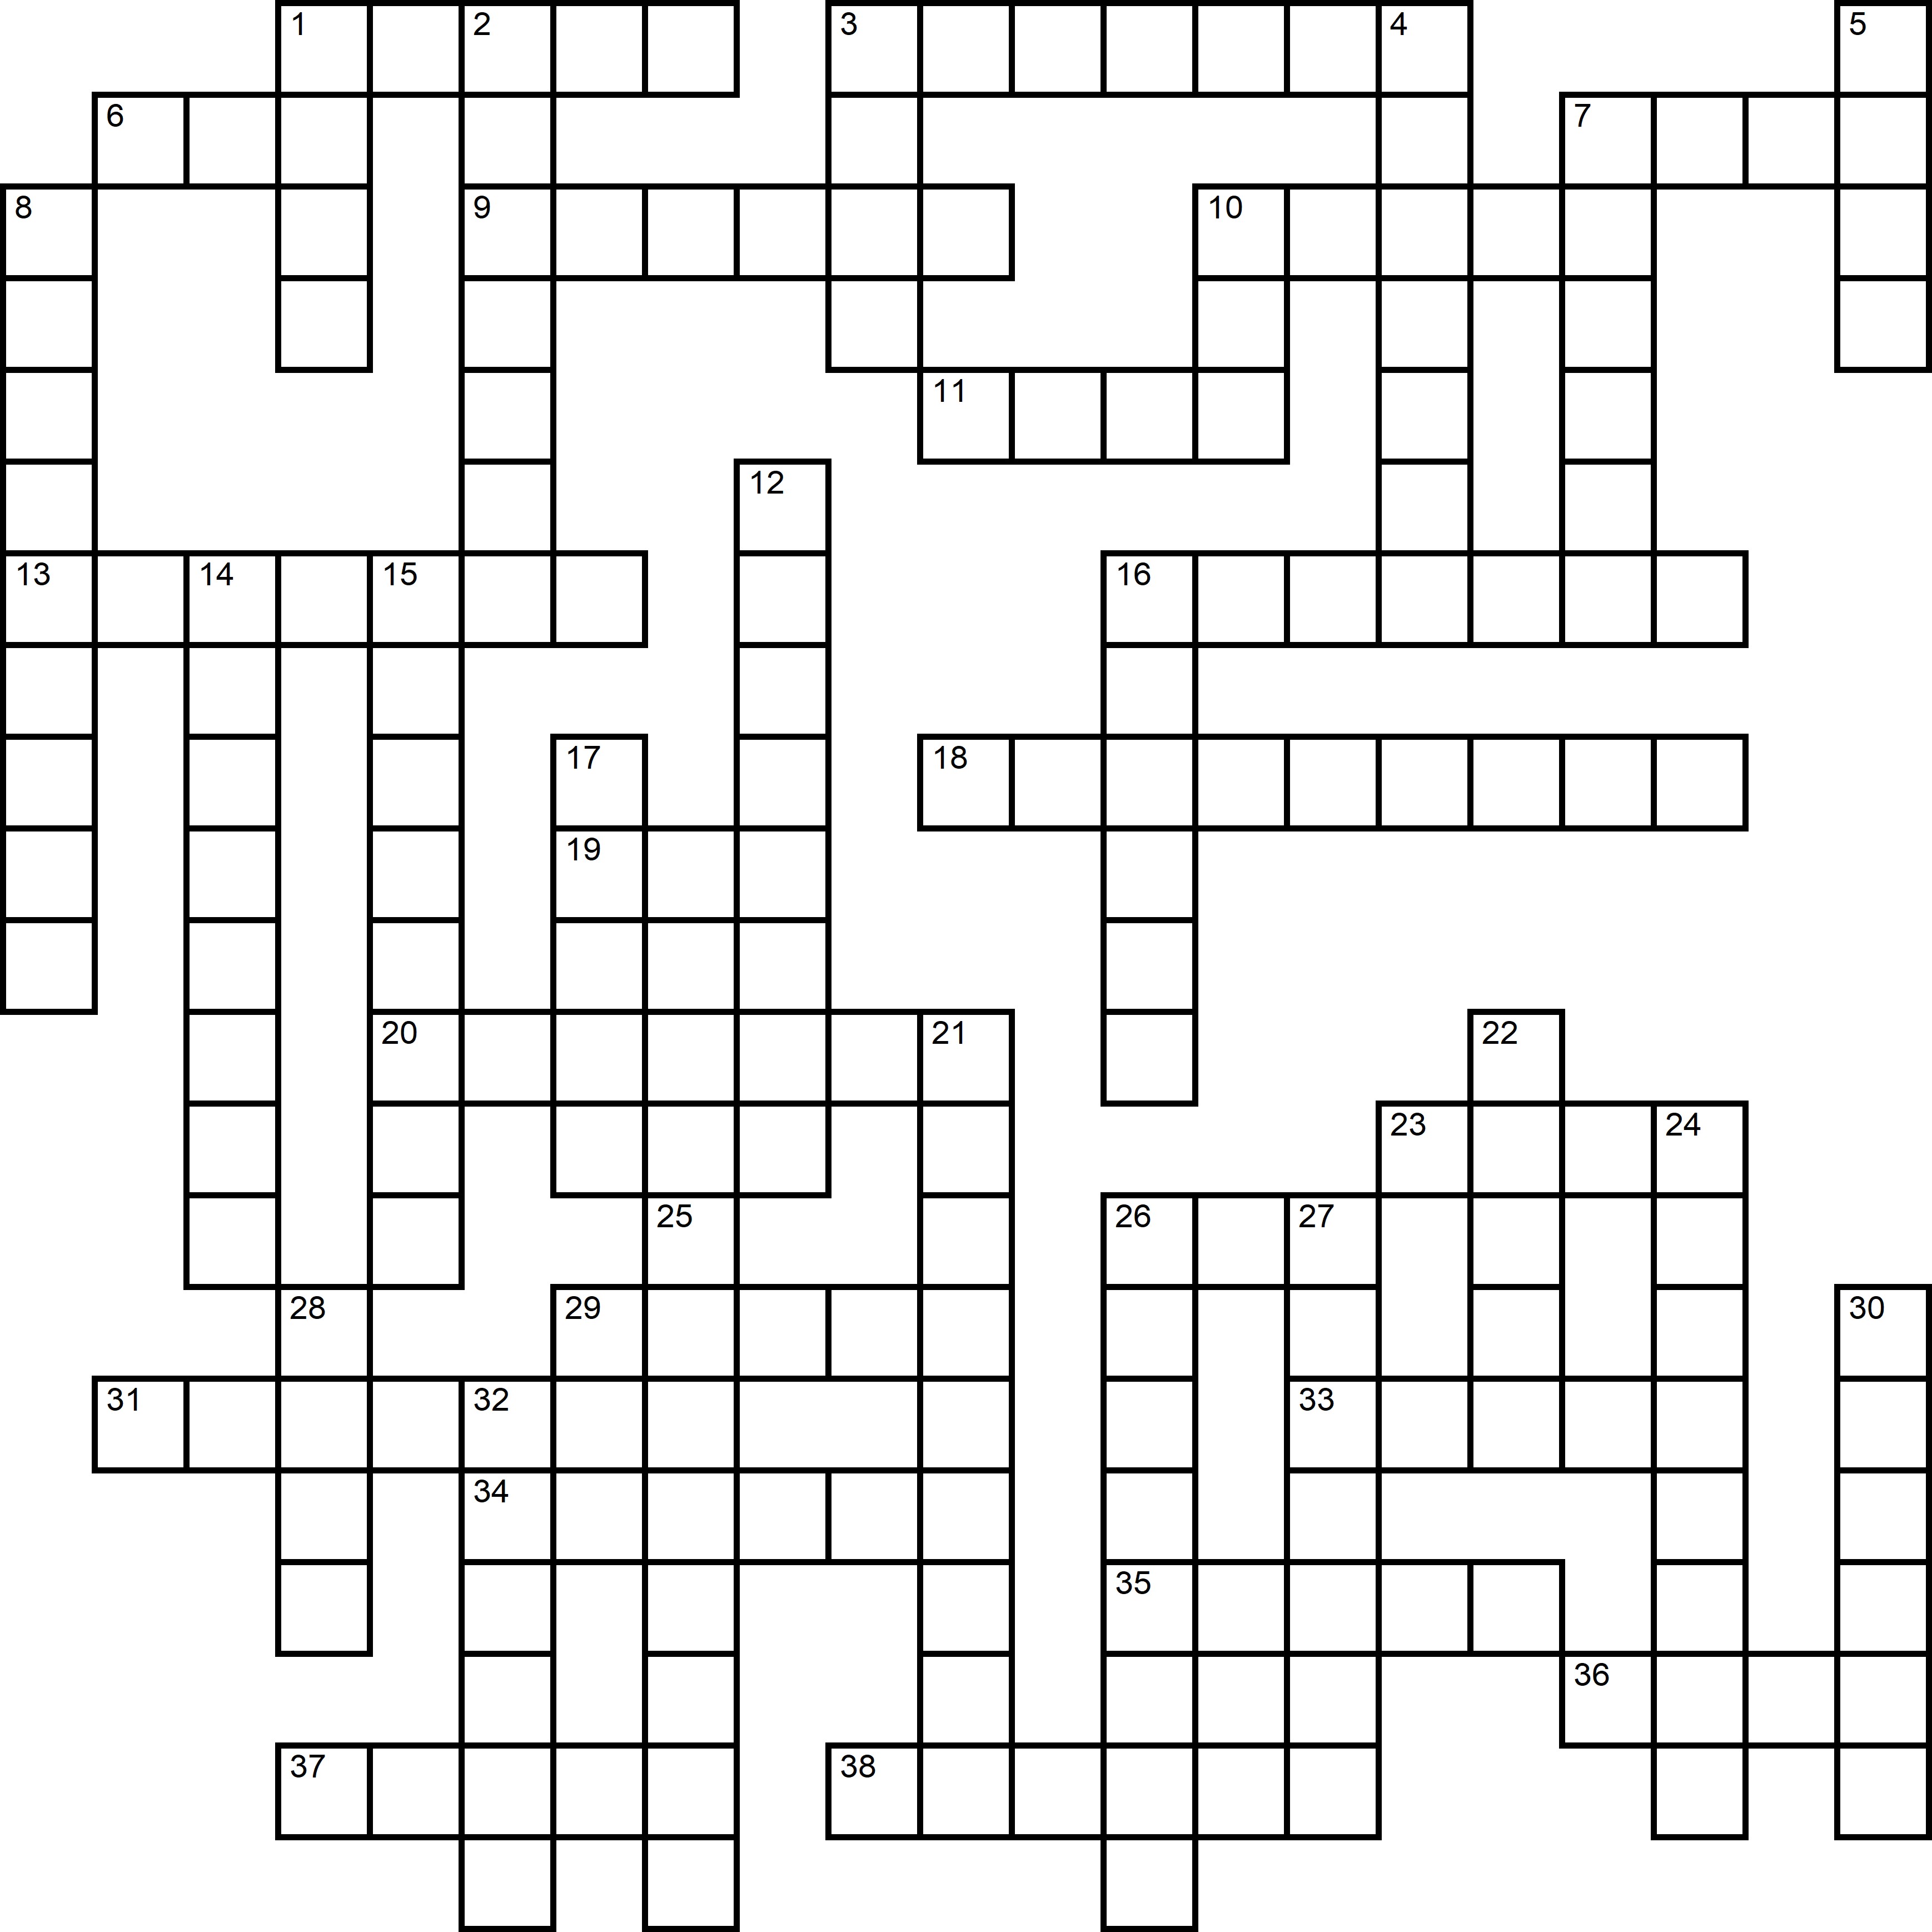 Easy Crossword About Fashion